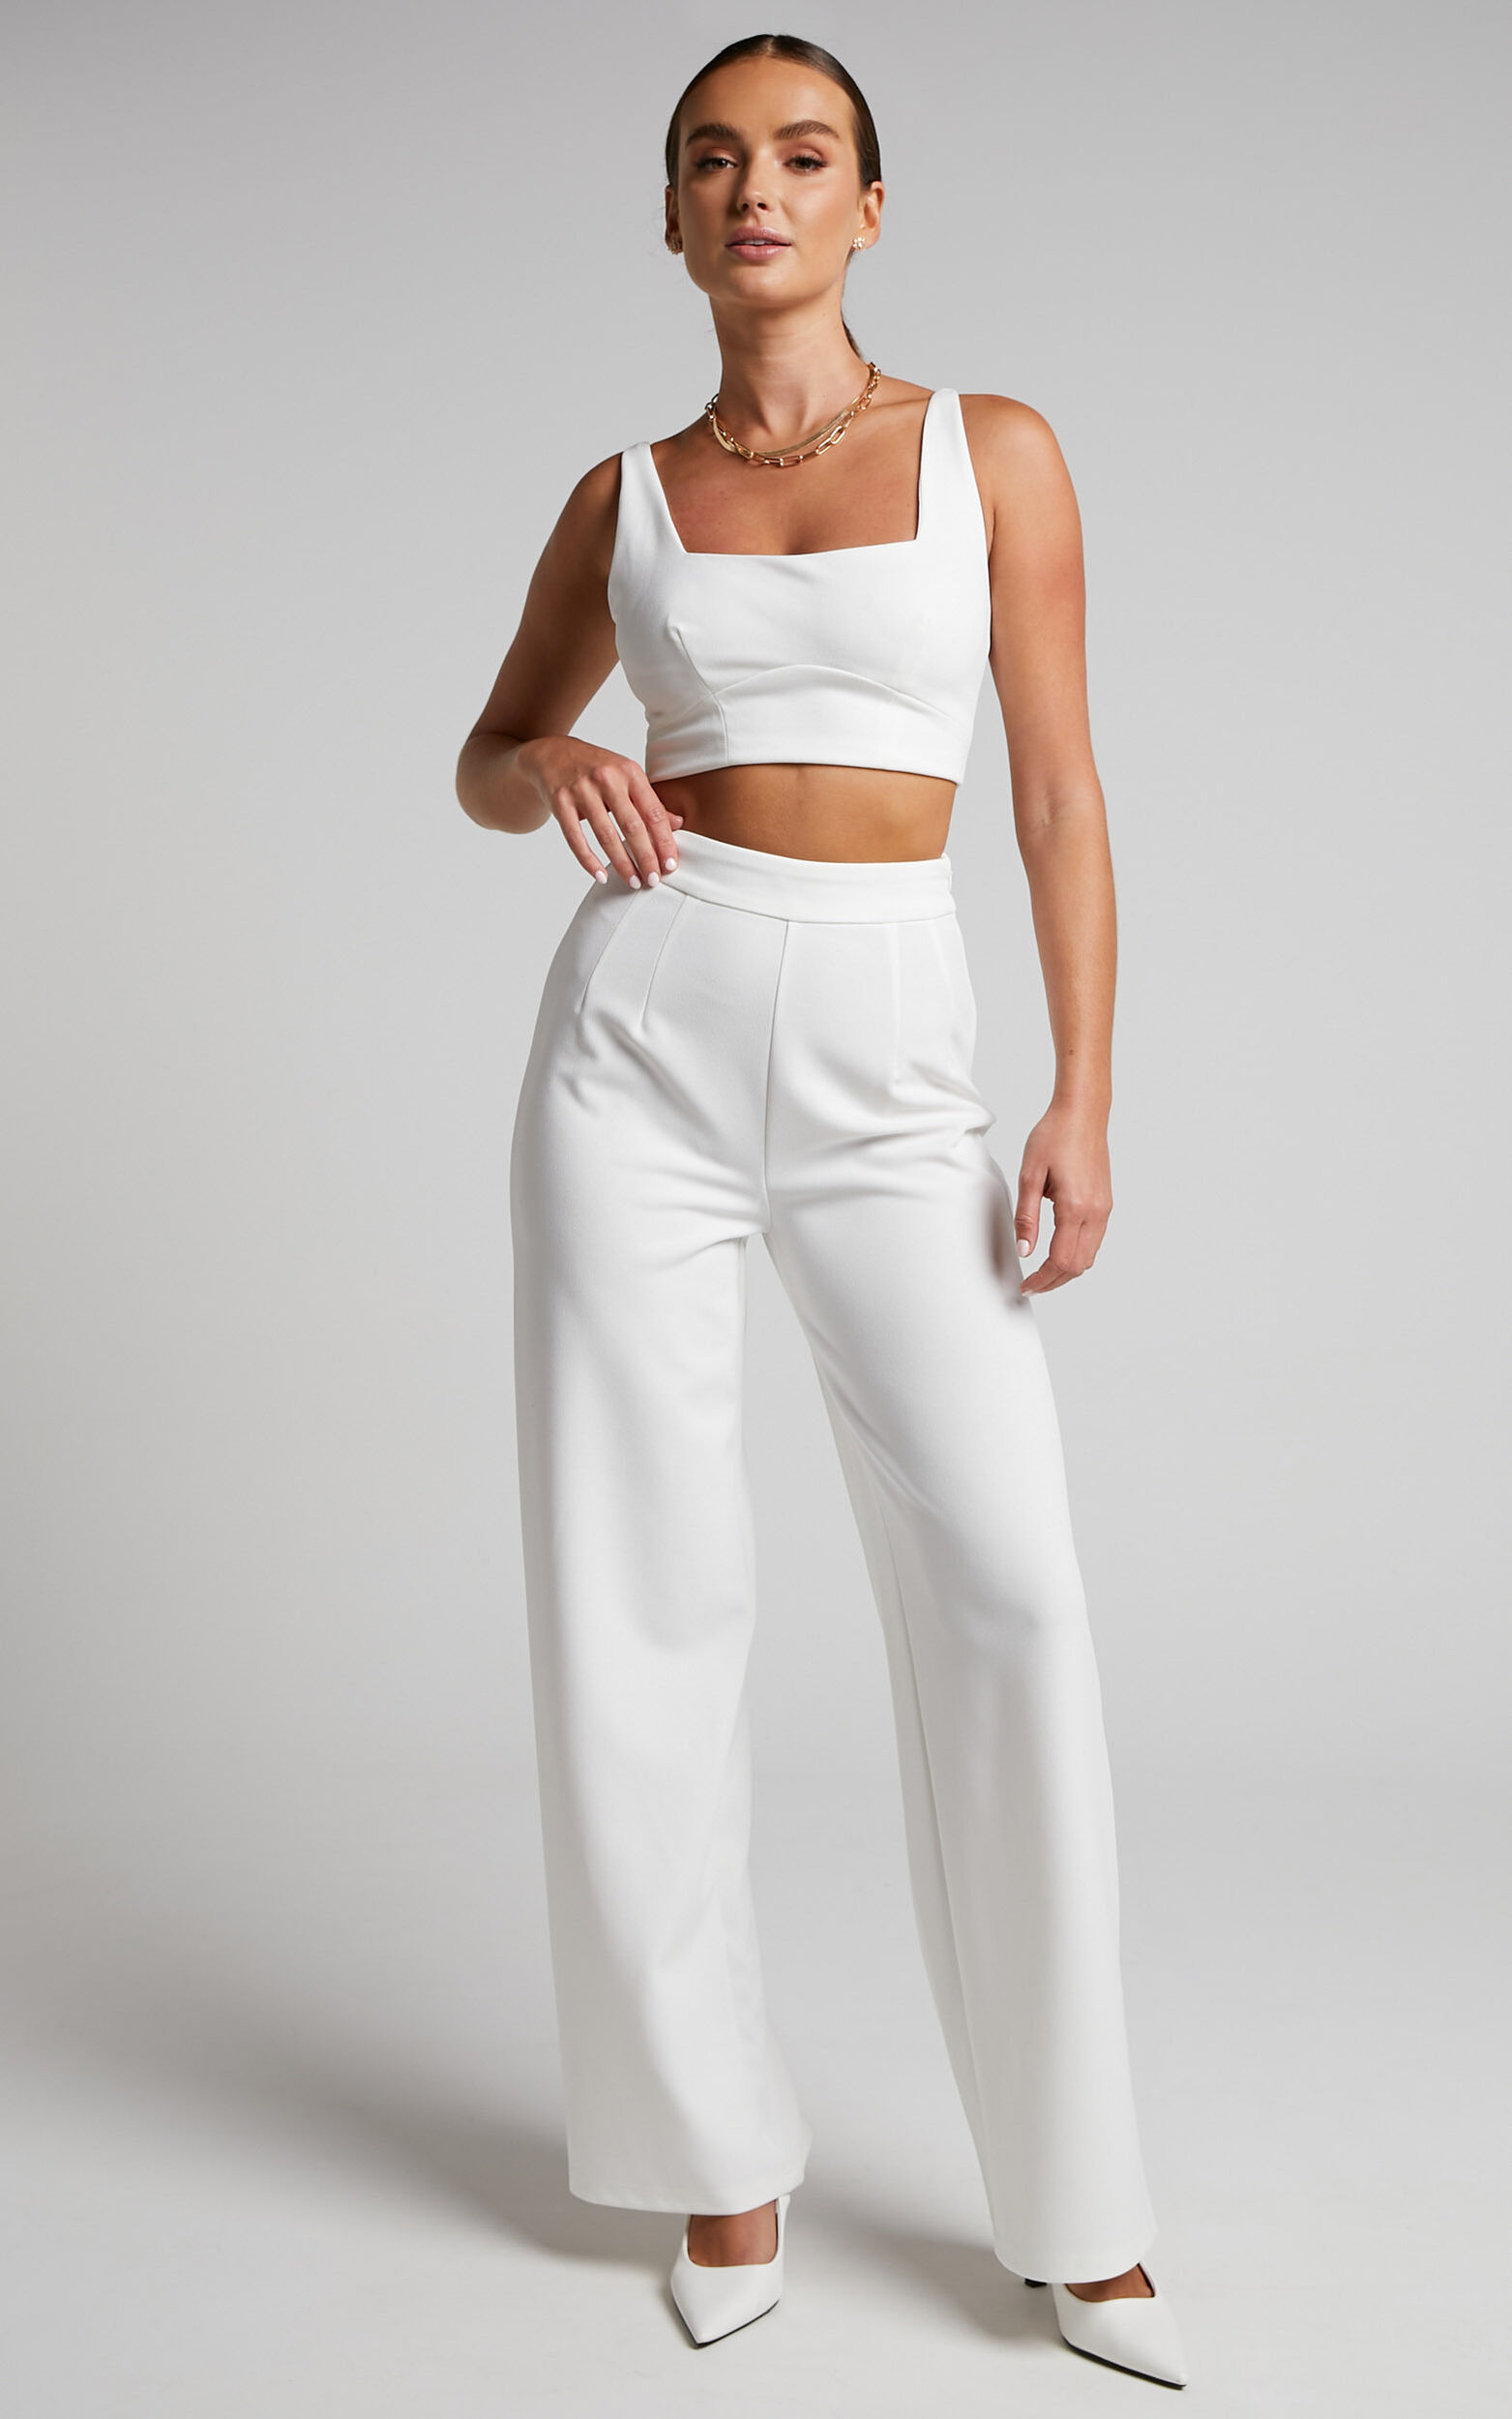 Elibeth Two Piece Set - Crop Top and High Waisted Wide Leg Pants Set in  White